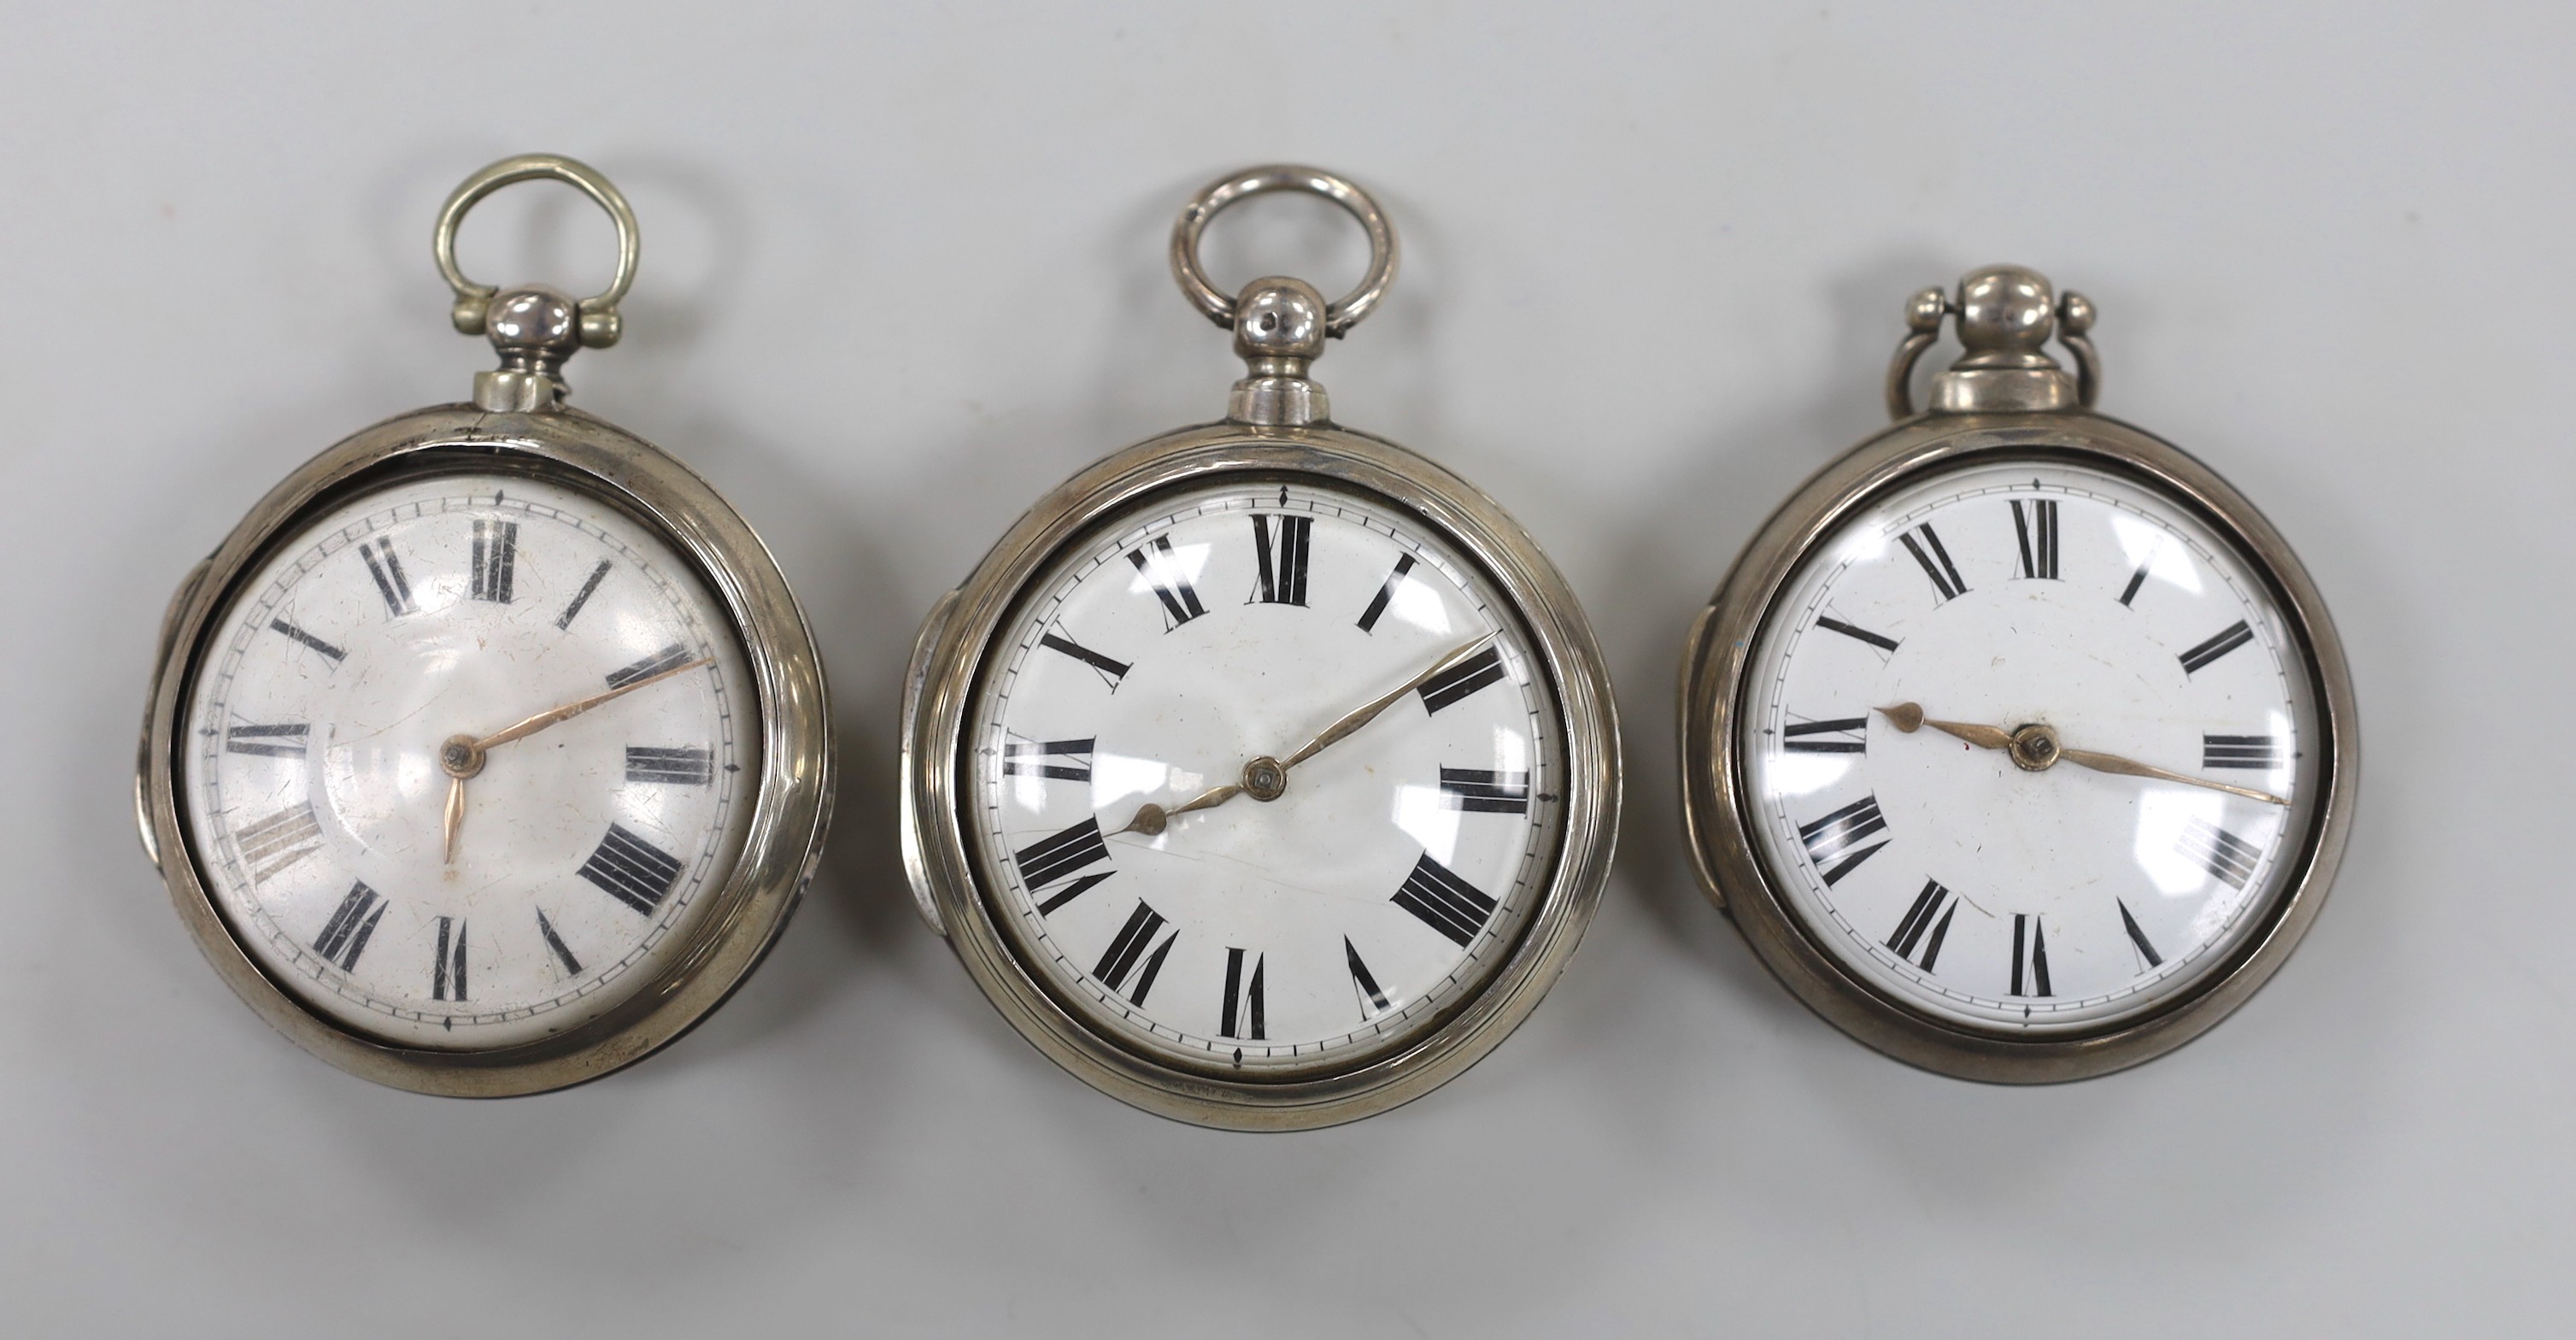 Three 19th century silver pair cased keywind verge pocket watches, by P. Matthew of Uckfield, the two others unsigned.